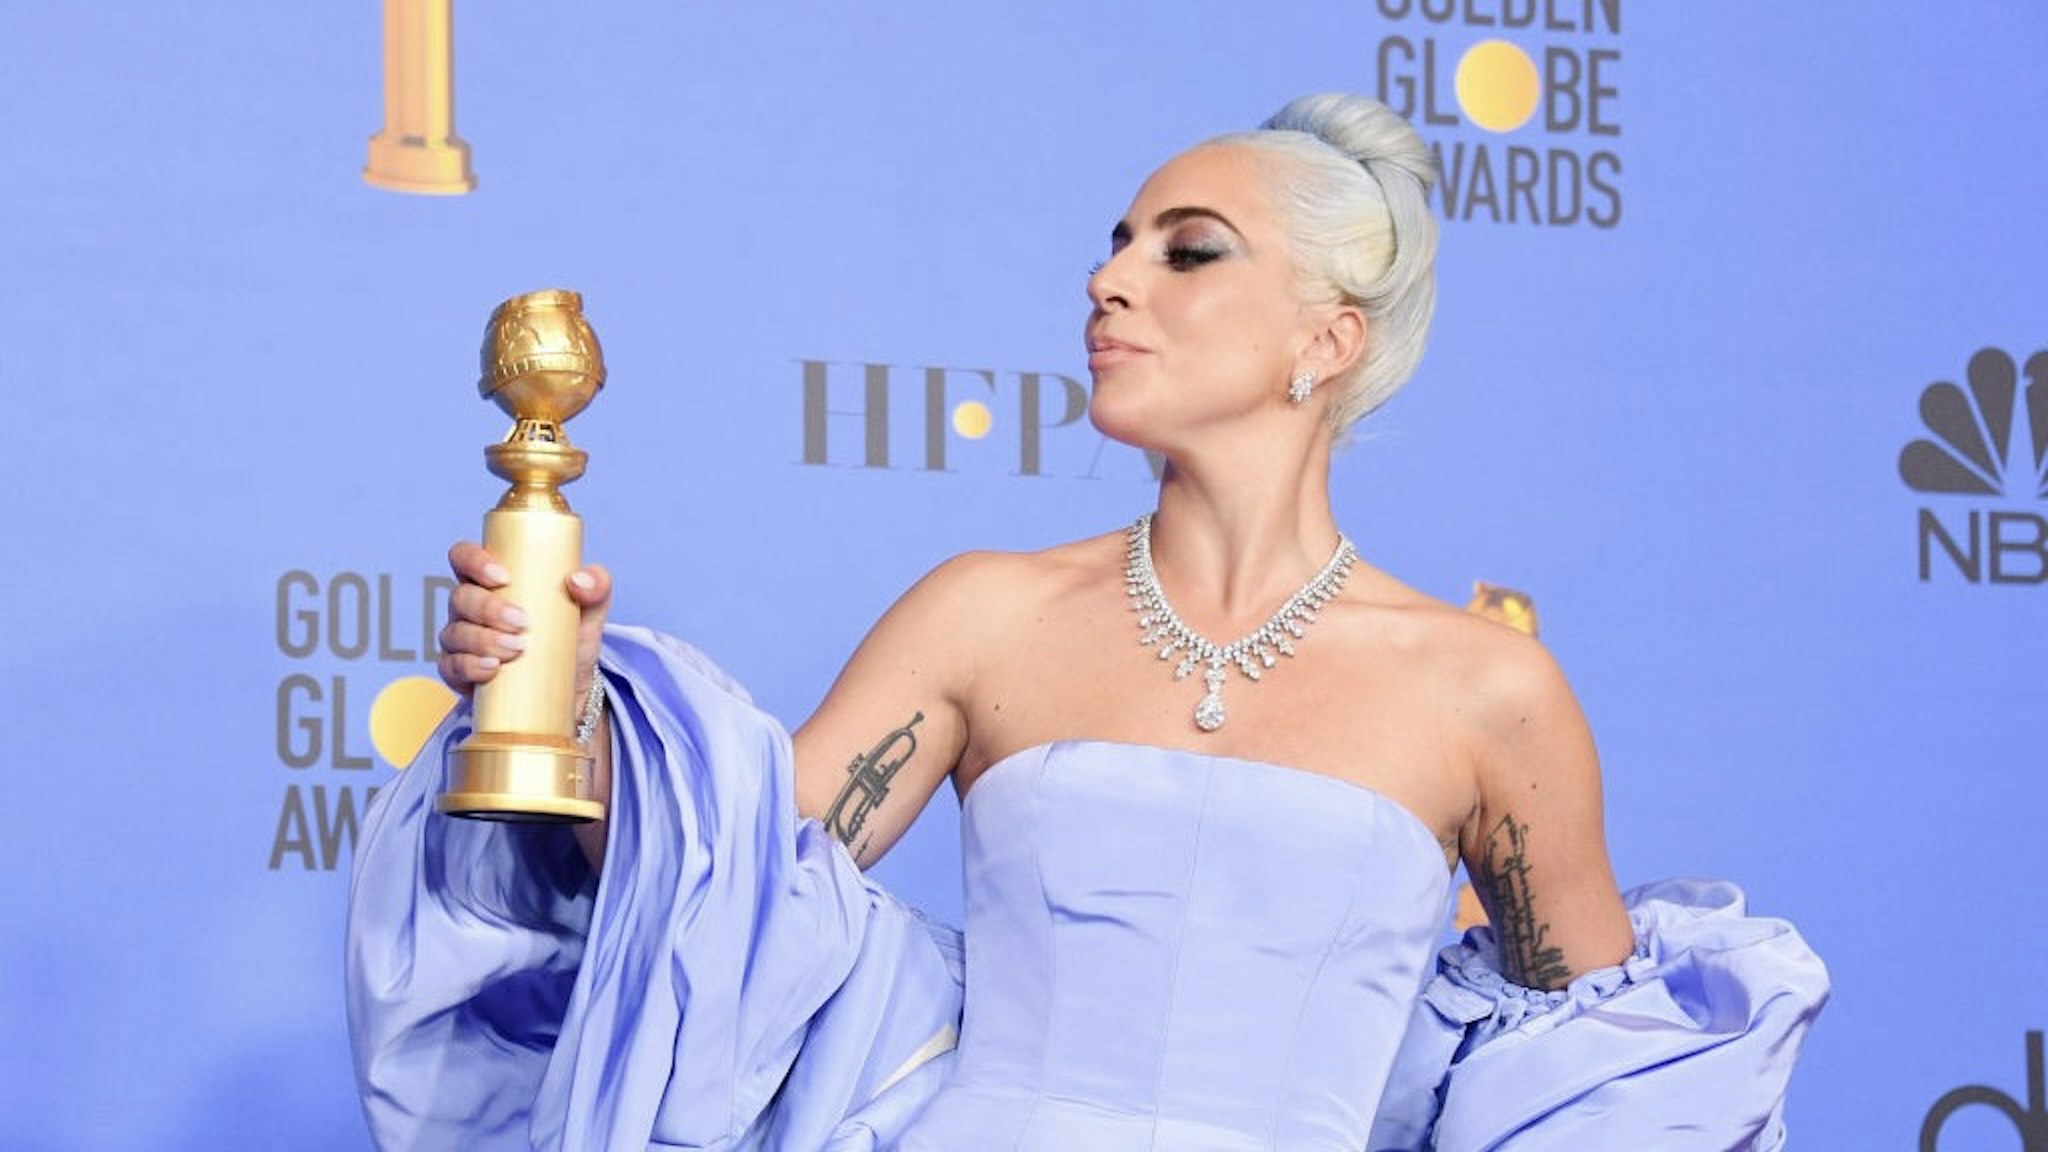 BEVERLY HILLS, CALIFORNIA - JANUARY 06: Winner for Best Original Song - Motion Picture for ‘Shallow - A Star is Born’ Lady Gaga poses with the trophy in the press room during the 76th Annual Golden Globe Awards at The Beverly Hilton Hotel on January 6, 2019 in Beverly Hills, California. (Photo by George Pimentel/WireImage)